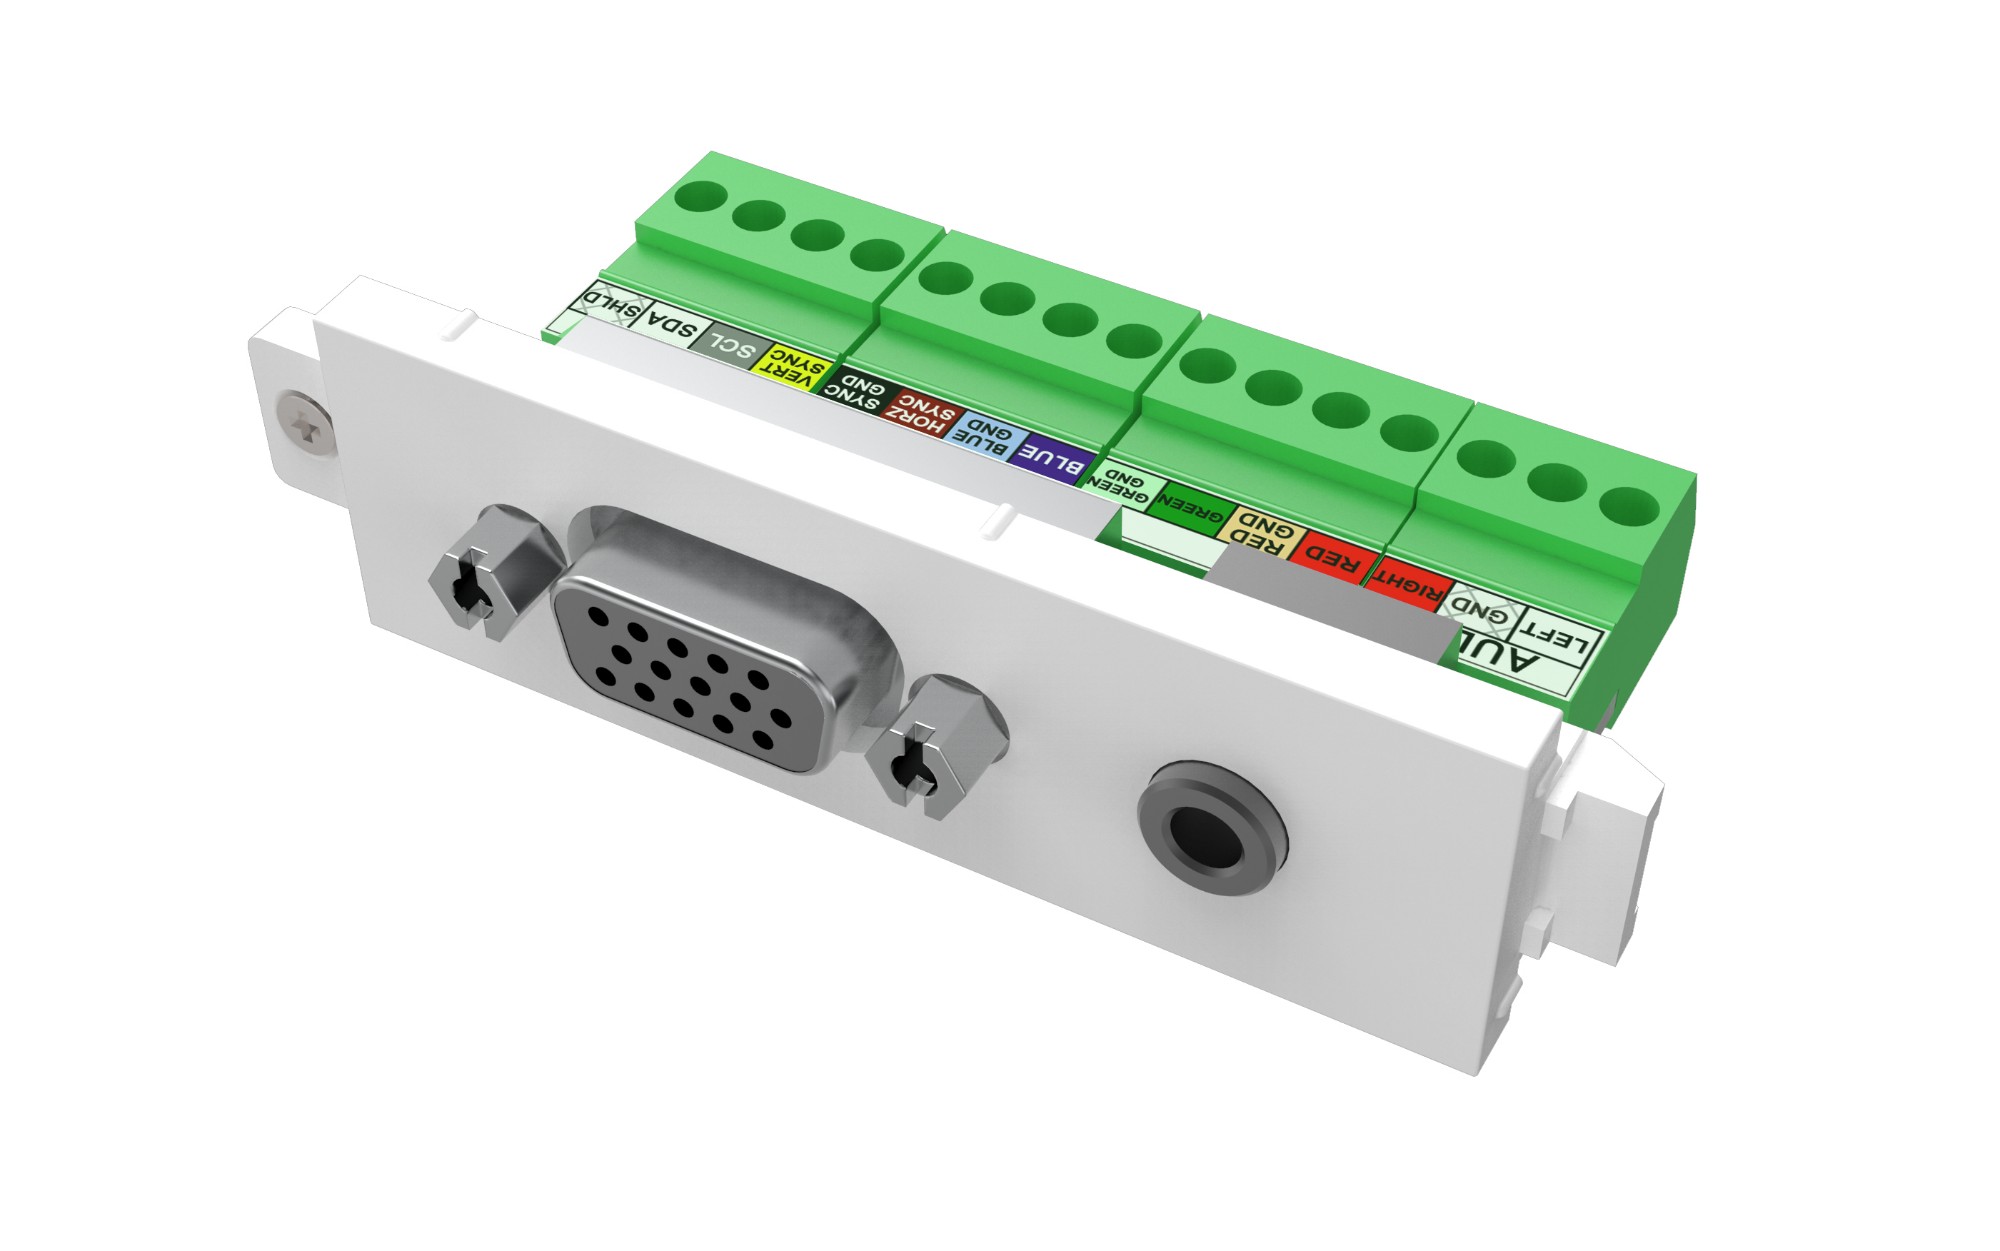 TC3 VGAF3.5MM VISION Techconnect Modular AV Faceplate - LIFETIME WARRANTY - VGA and Minijack module - female 15-pin VGA and minijack socket for audio on front - bare-wire phoenix connectors on rear - suits pre-terminated Vision cables - fixes into Techconnect surrounds - plas